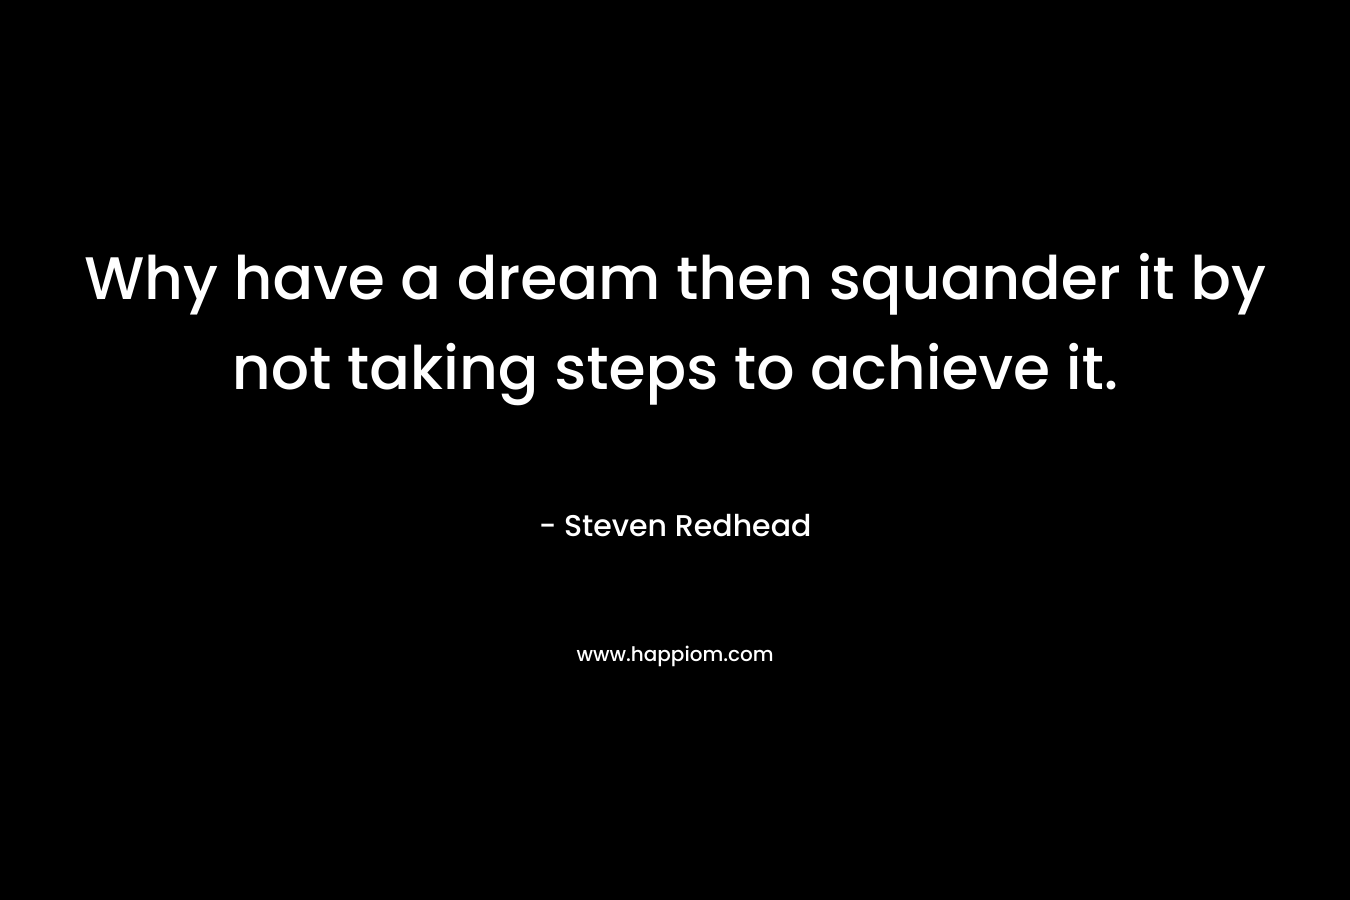 Why have a dream then squander it by not taking steps to achieve it. – Steven Redhead